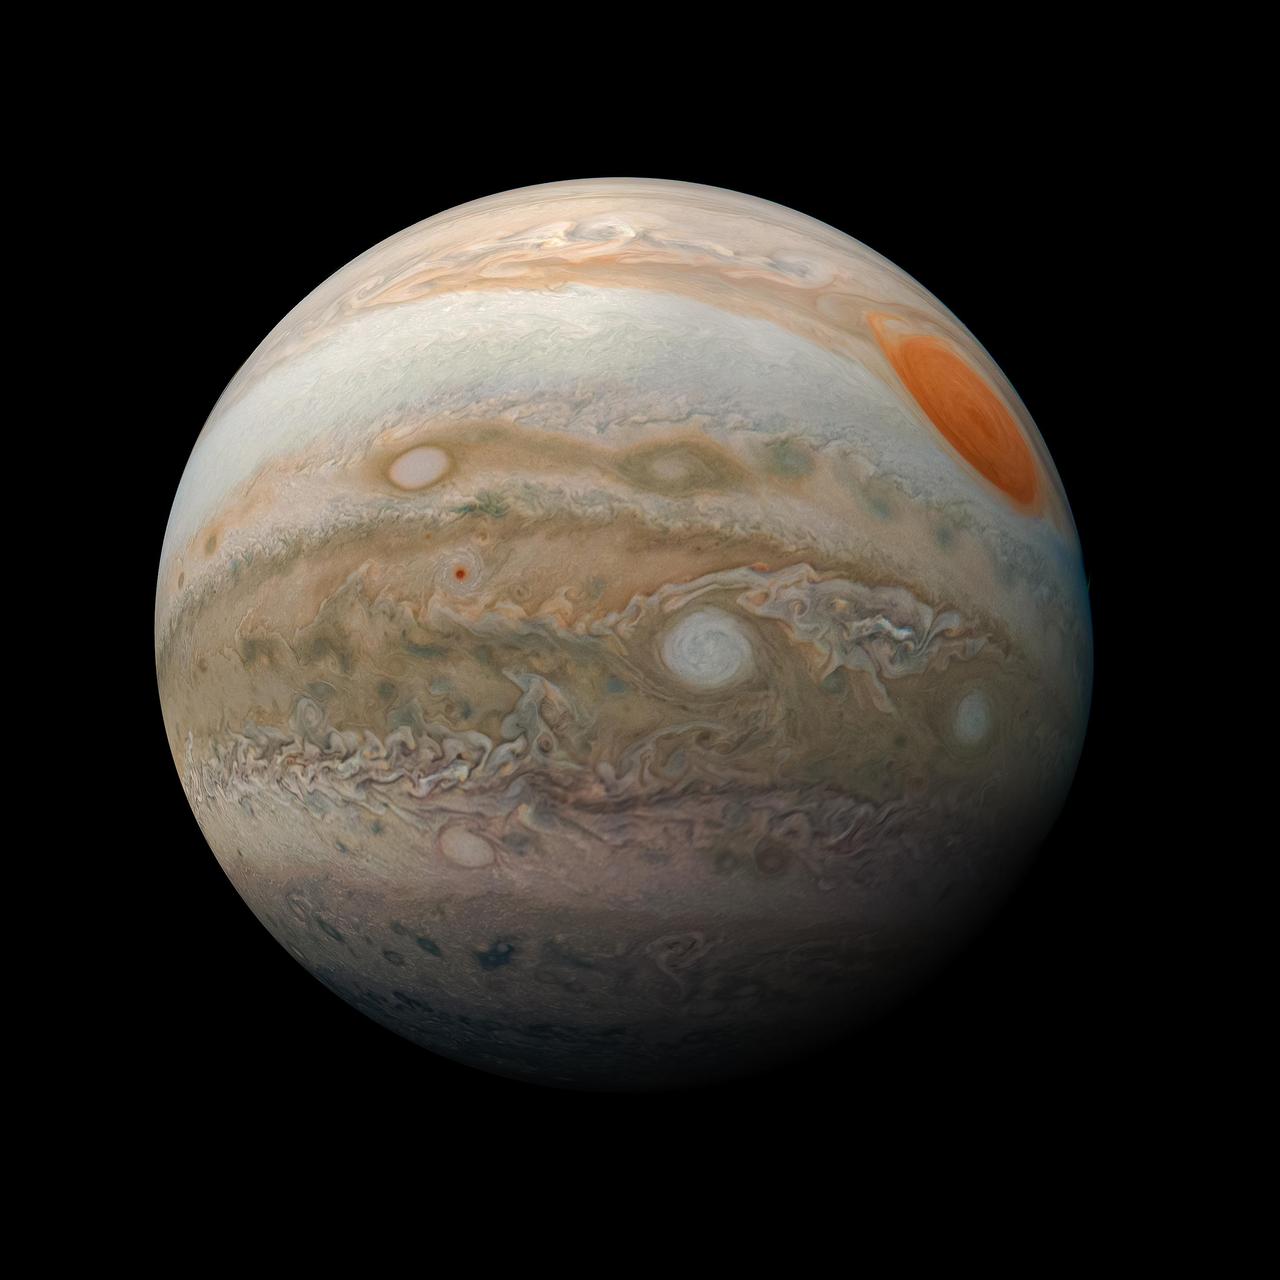 Jupiter's Great Red Spot and turbulent southern hemisphere